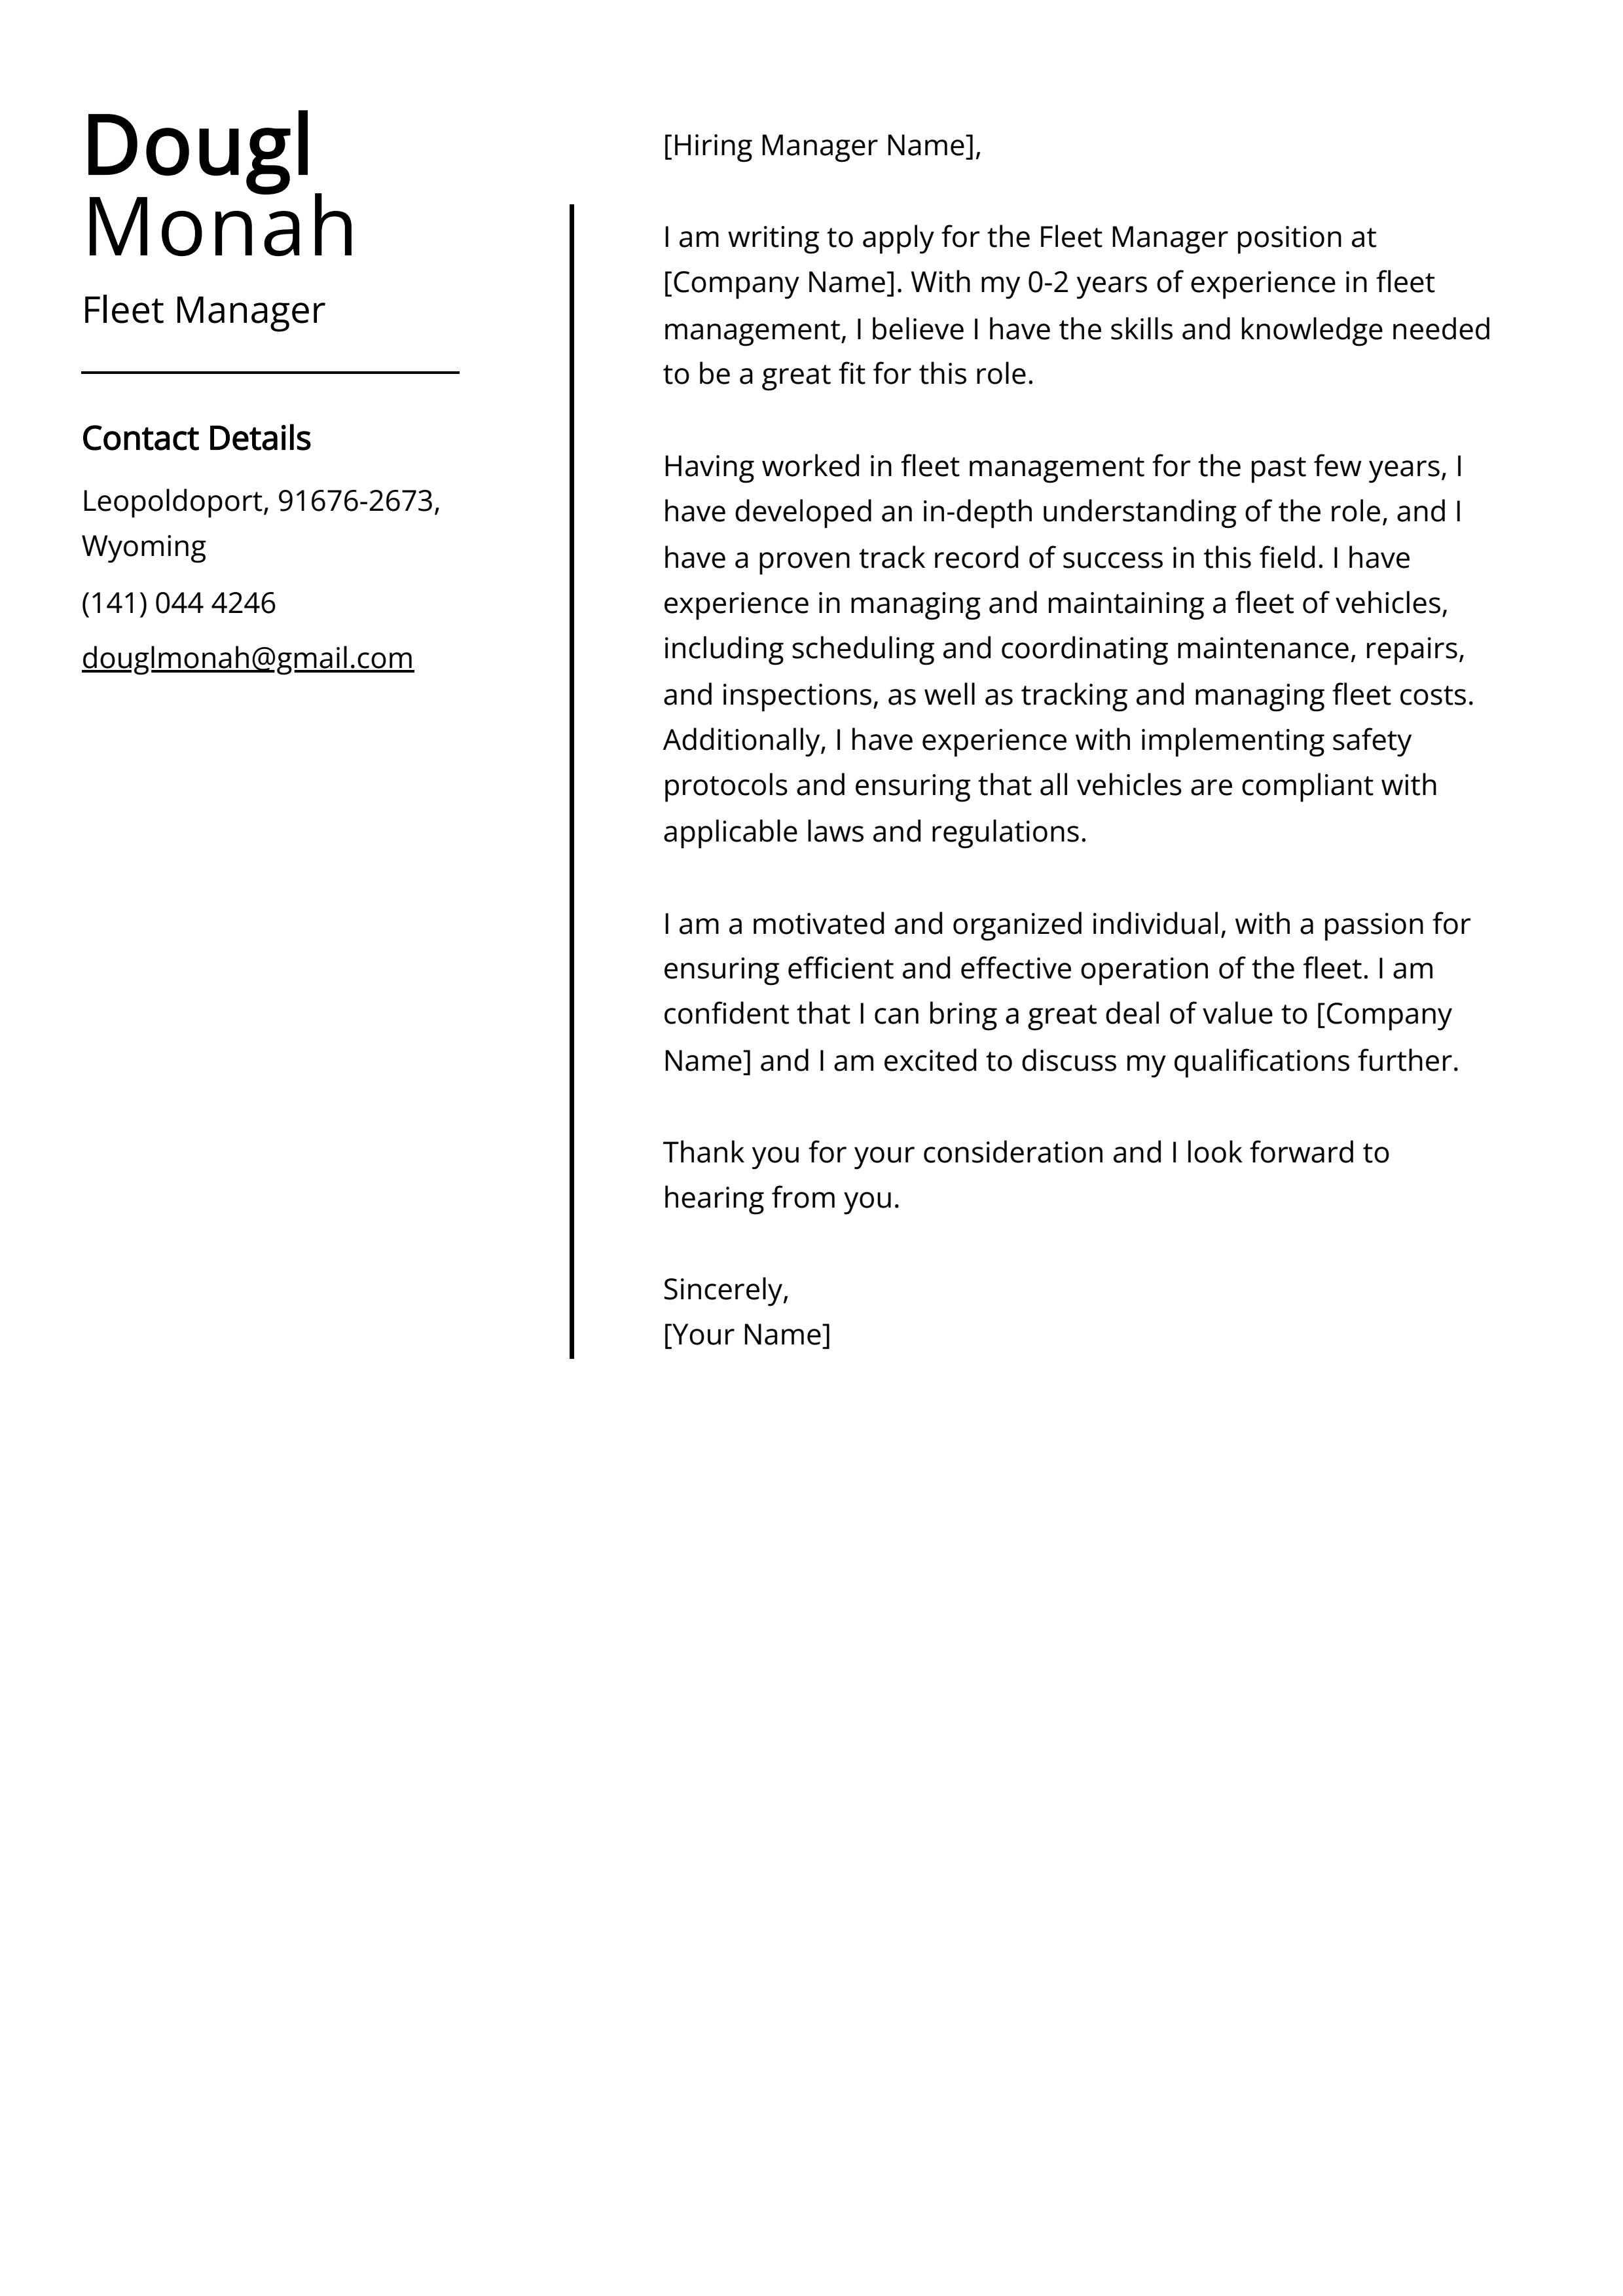 Fleet Manager Cover Letter Example